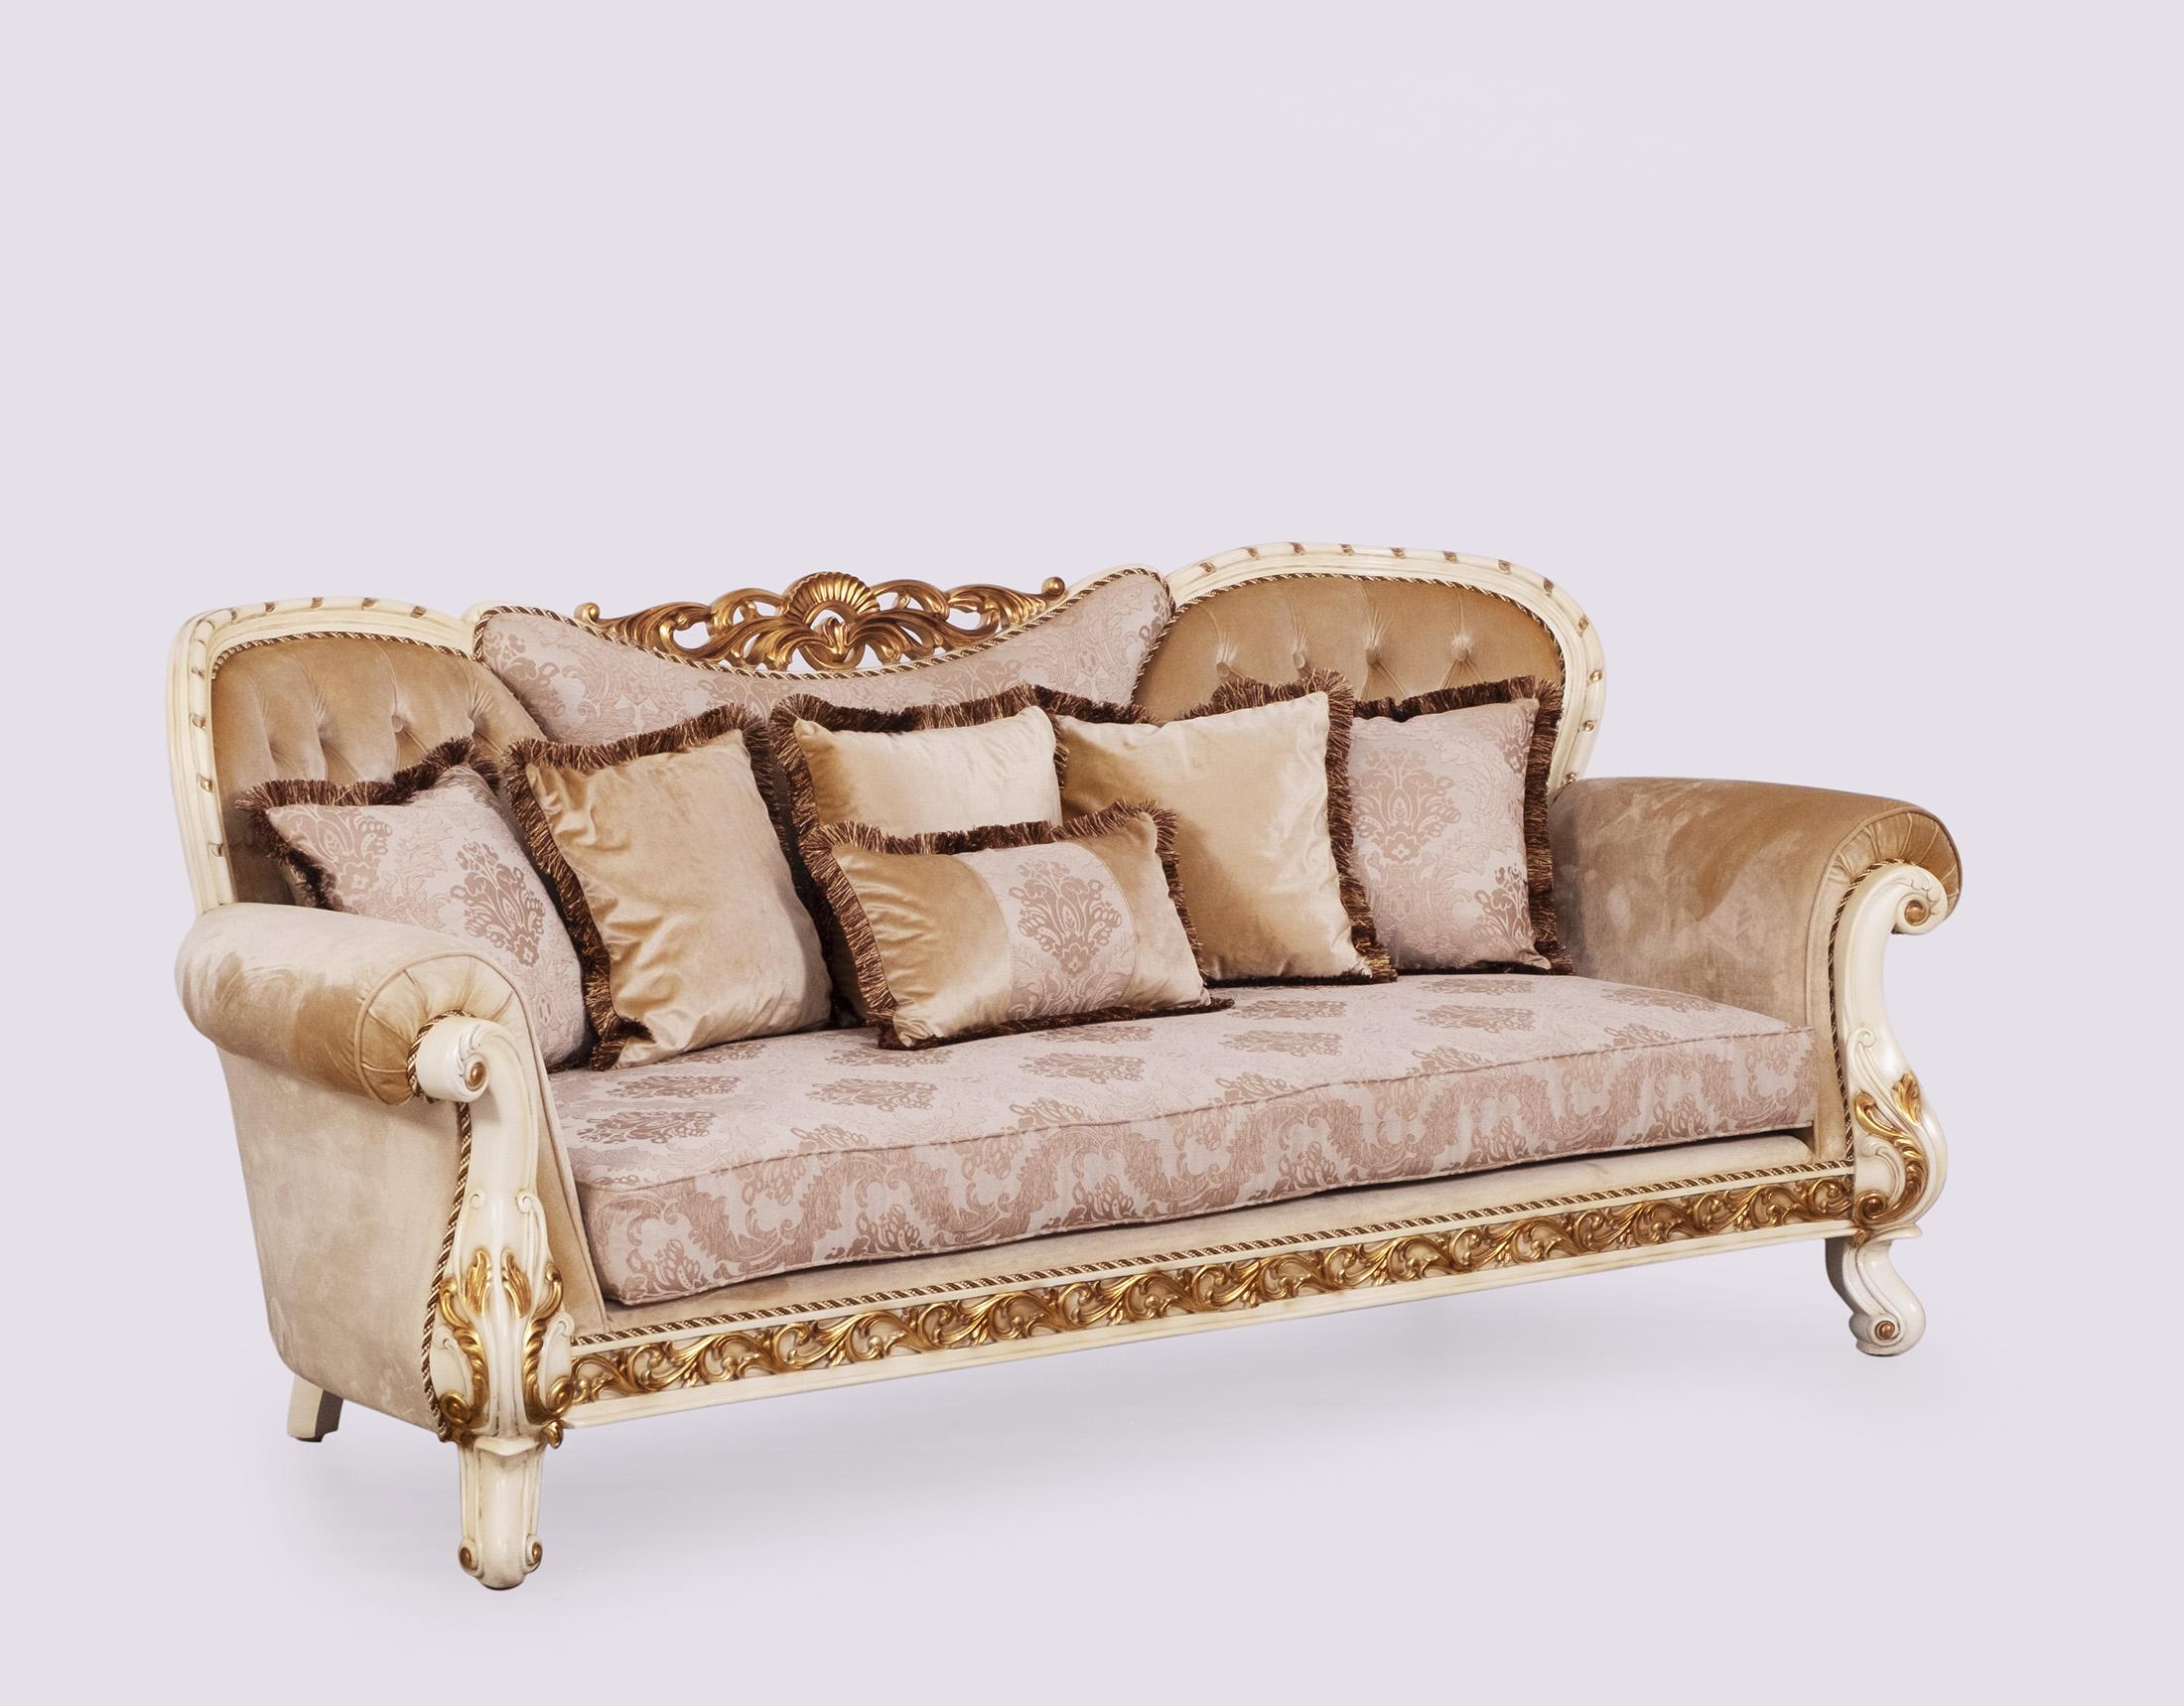 Classic, Traditional Sofa FANTASIA 40017-S in Sand, Gold, Beige Fabric